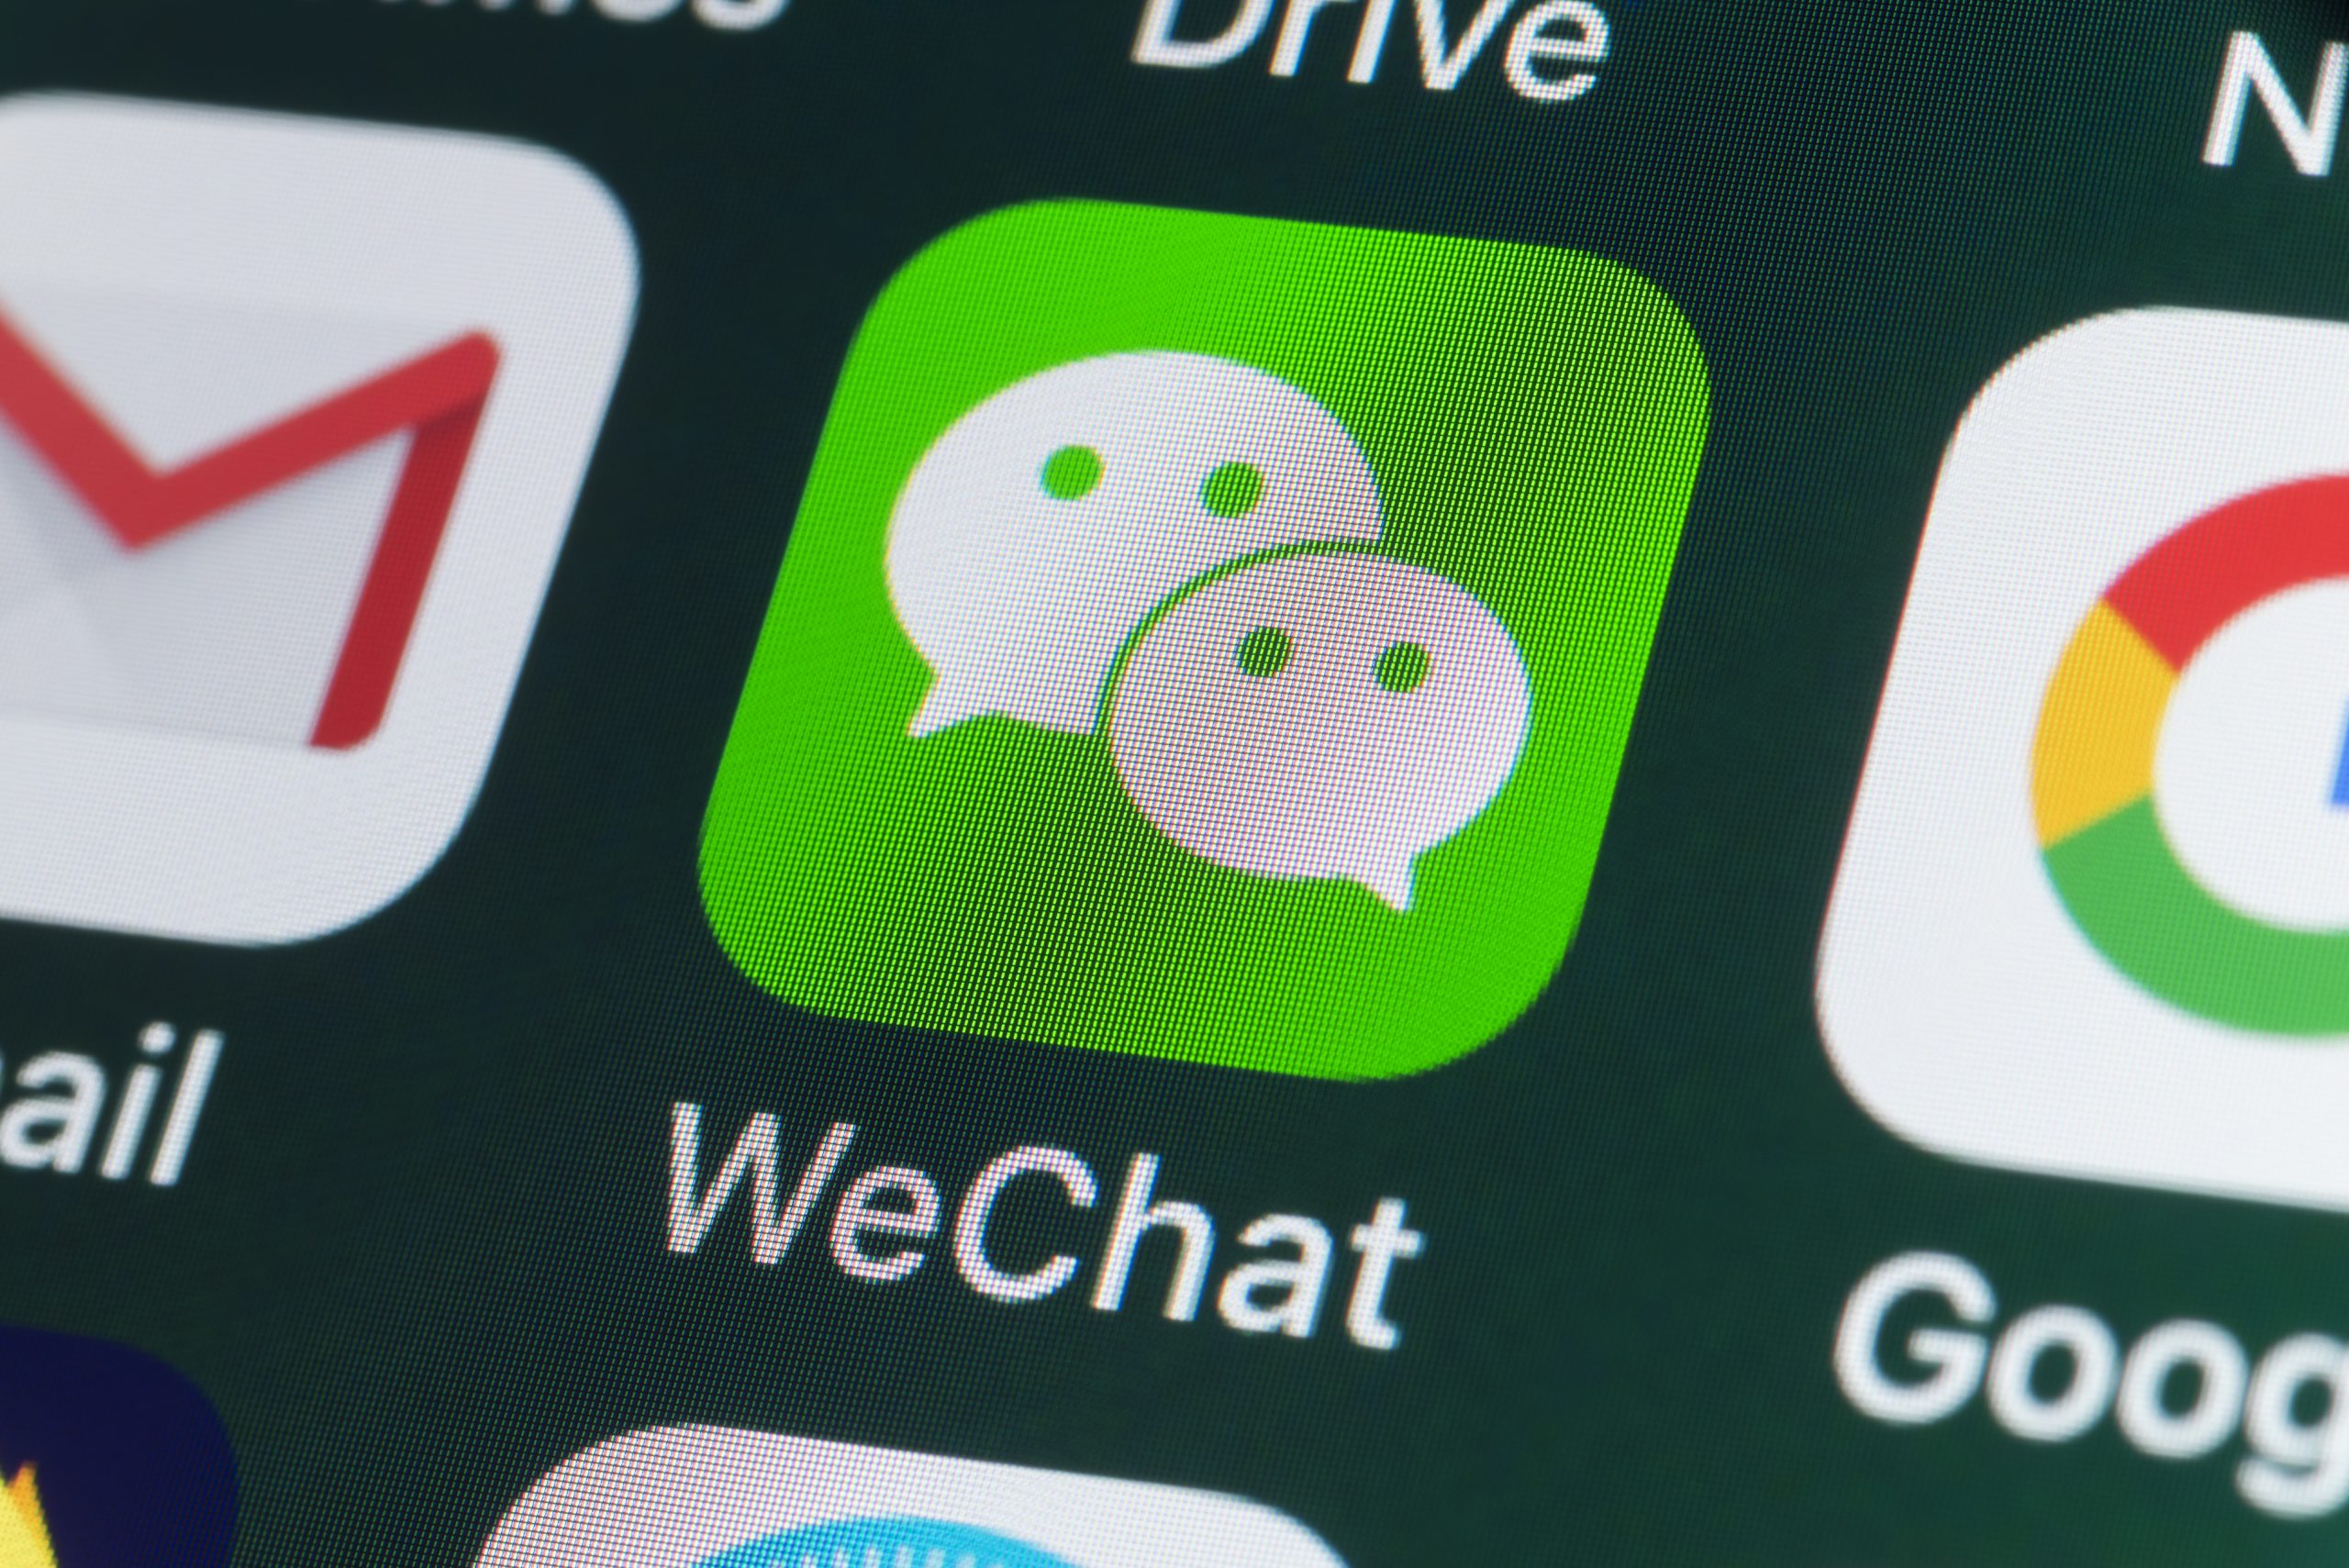 wechat channel unavailable in your country